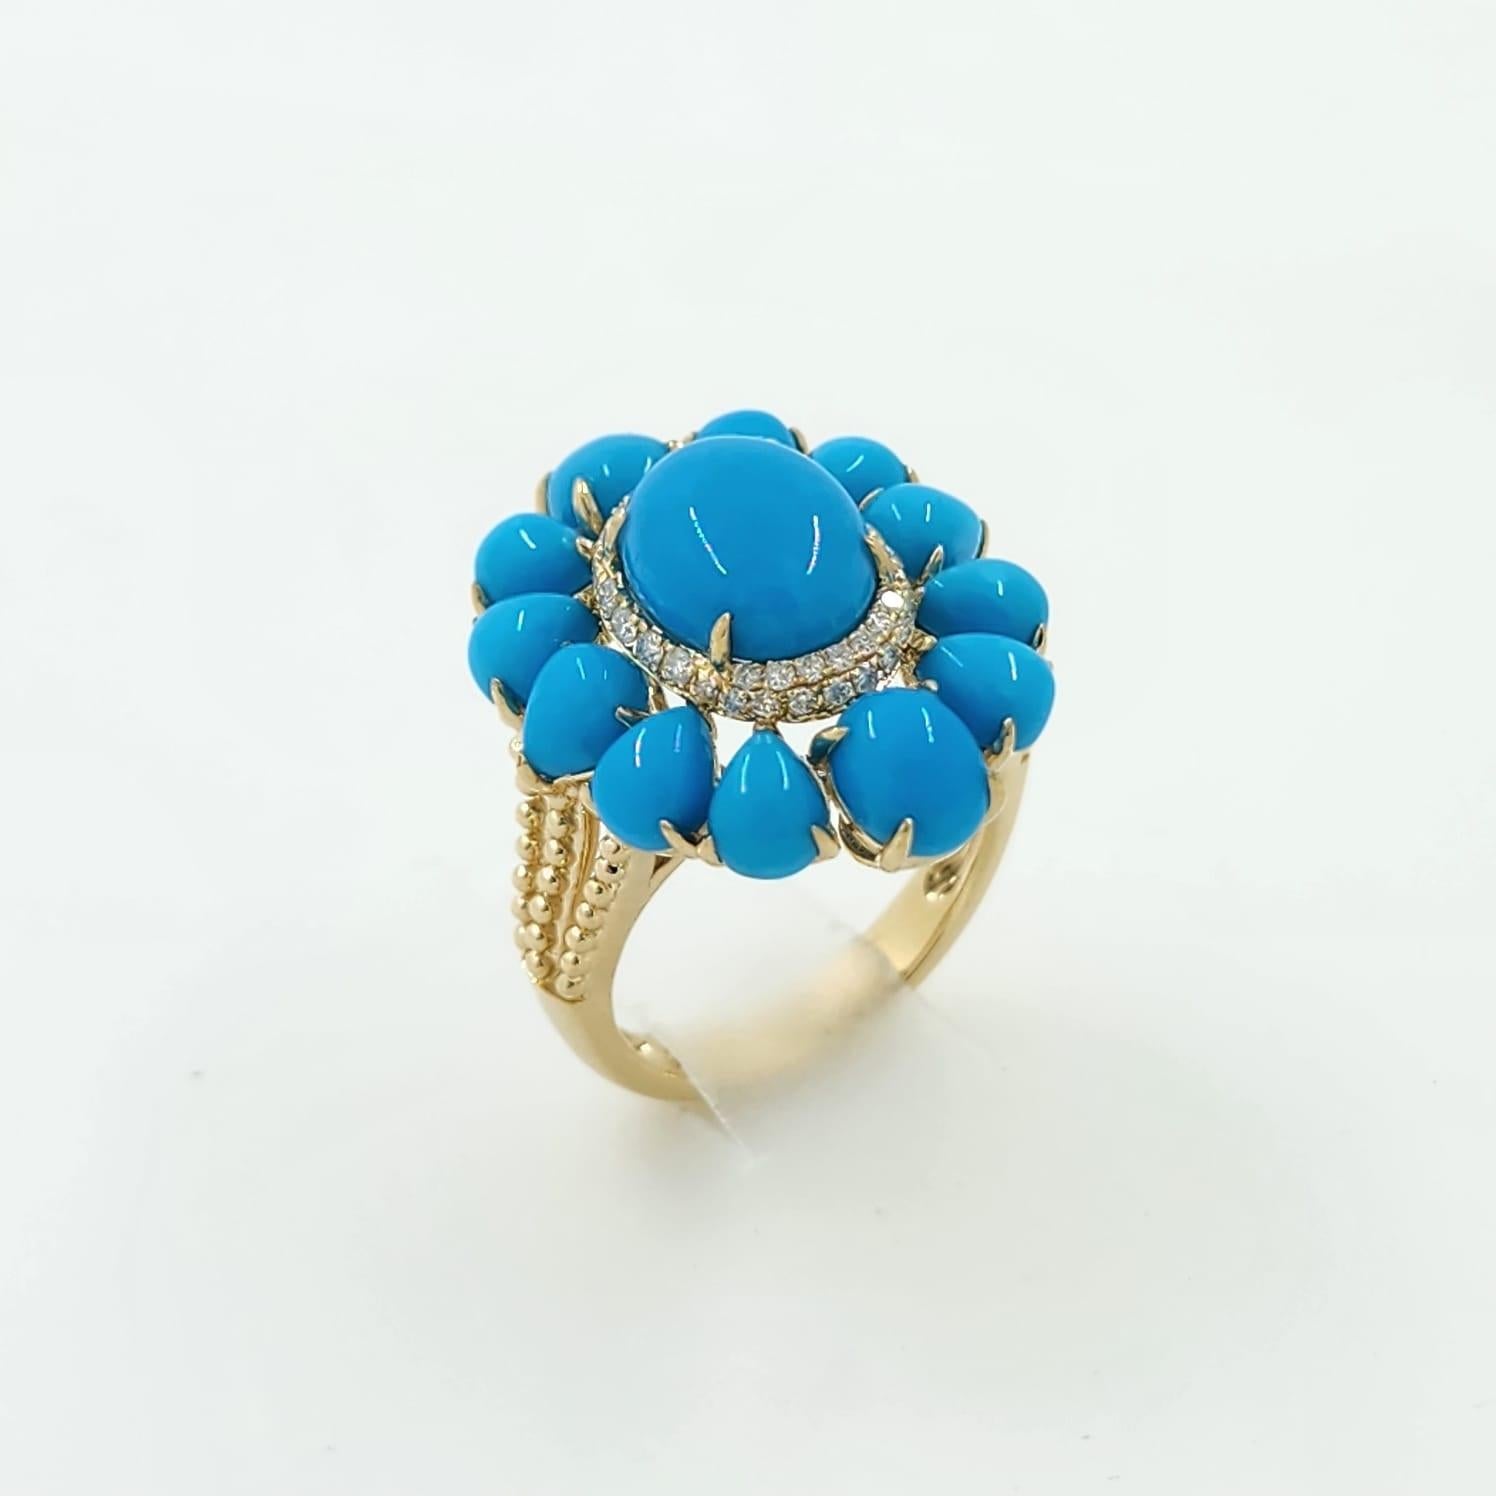 Cabochon Vintage Style Sleeping Beauty Turquoise Ring in 14 Karat White and Yellow Gold For Sale